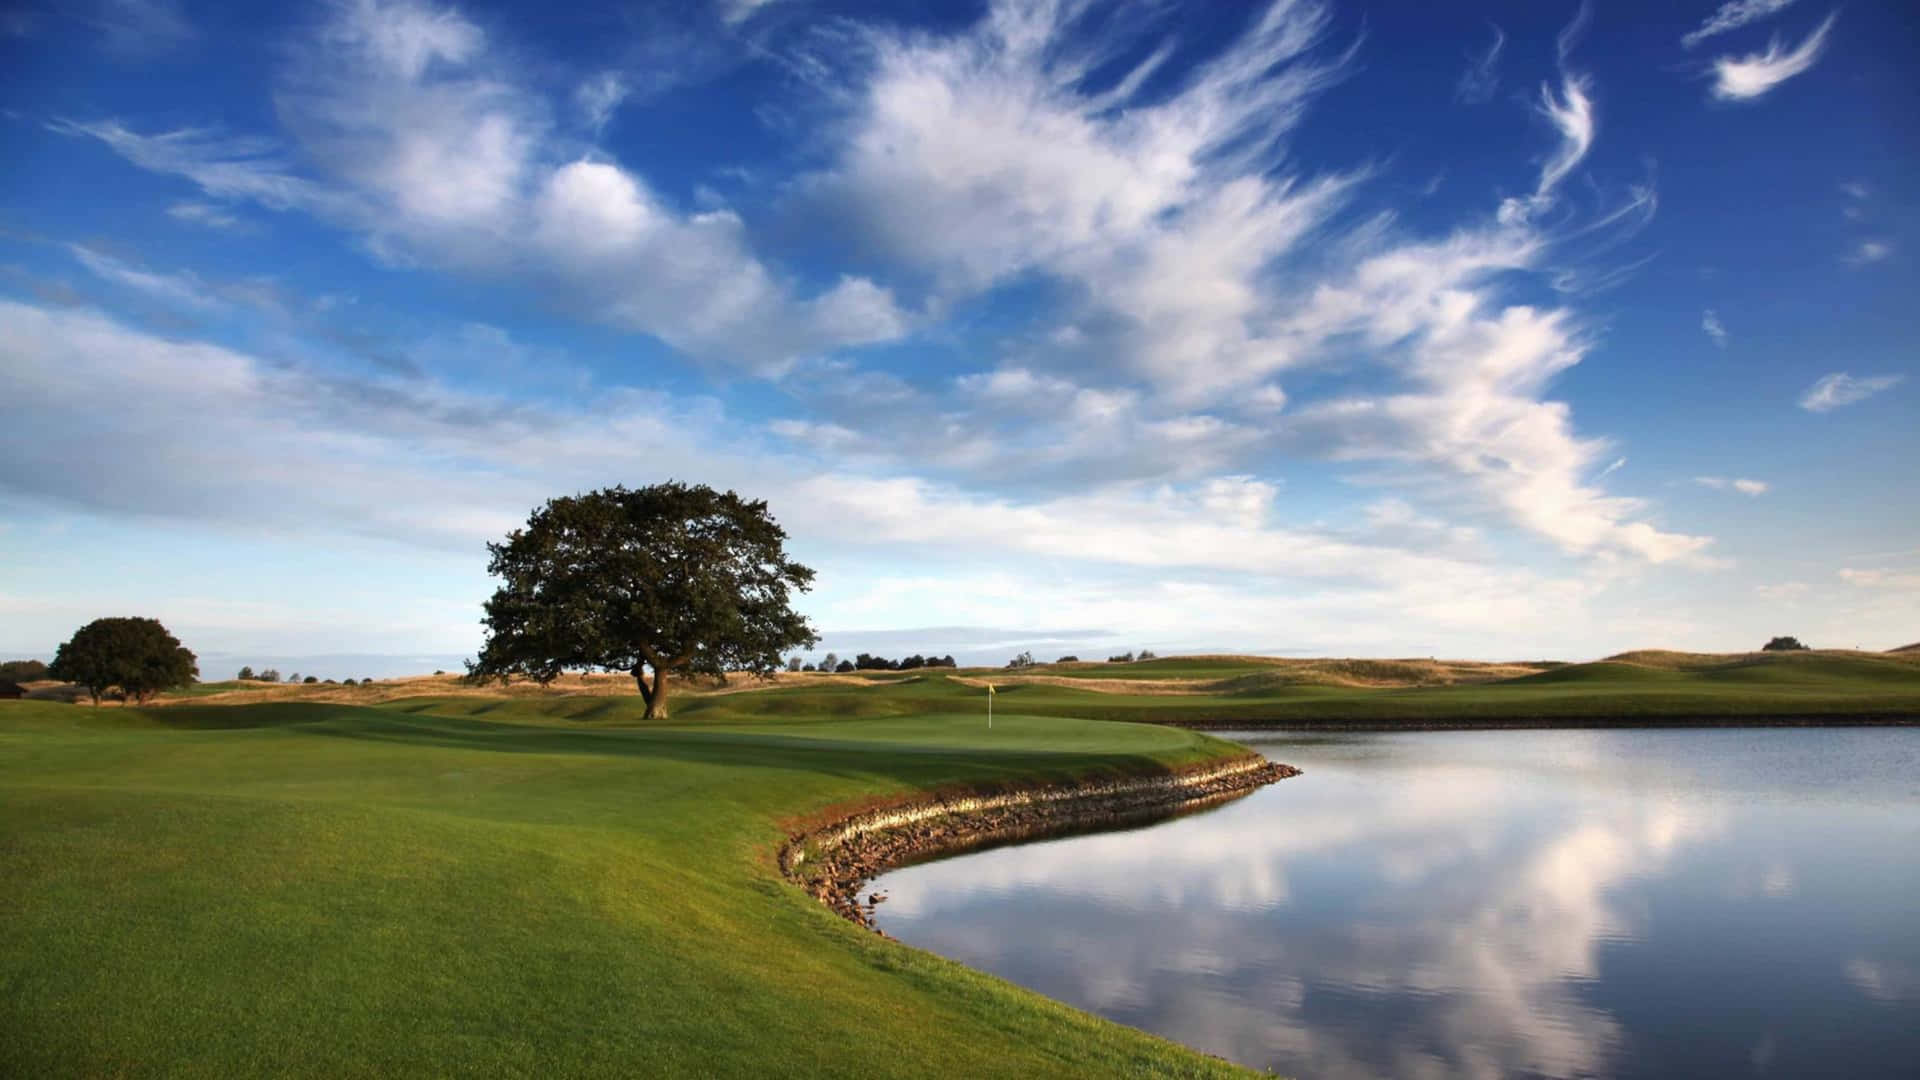 4K Golf Course Wallpaper: Experience Serenity on the Green